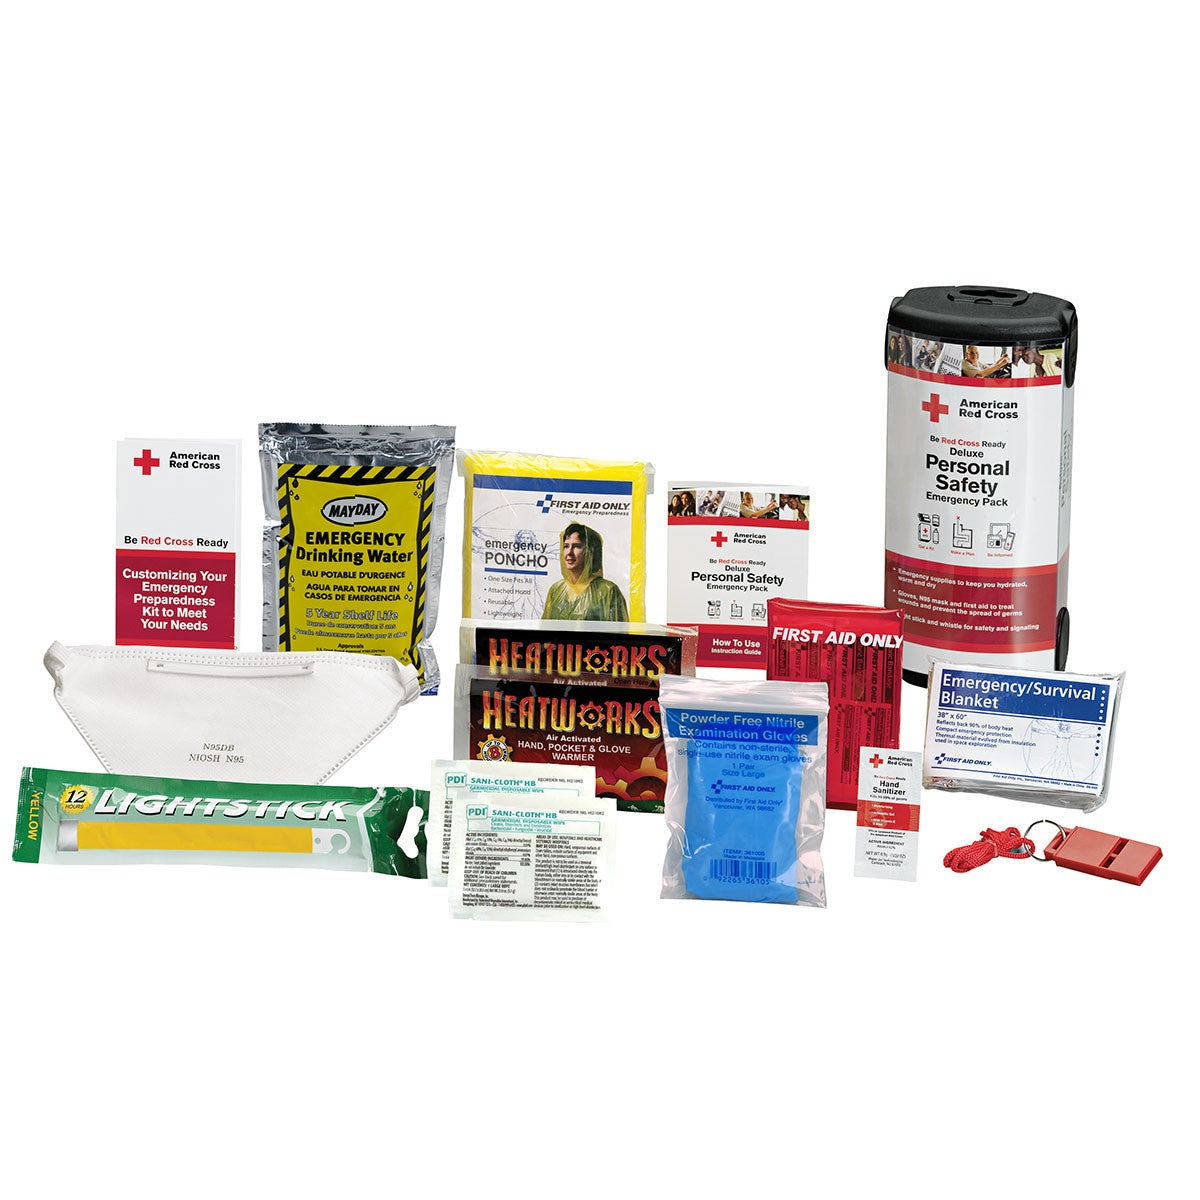 American Red Cross Deluxe Personal Safety Emergency Pack By First Aid Only - BS-FAK-RC-613-1-FM